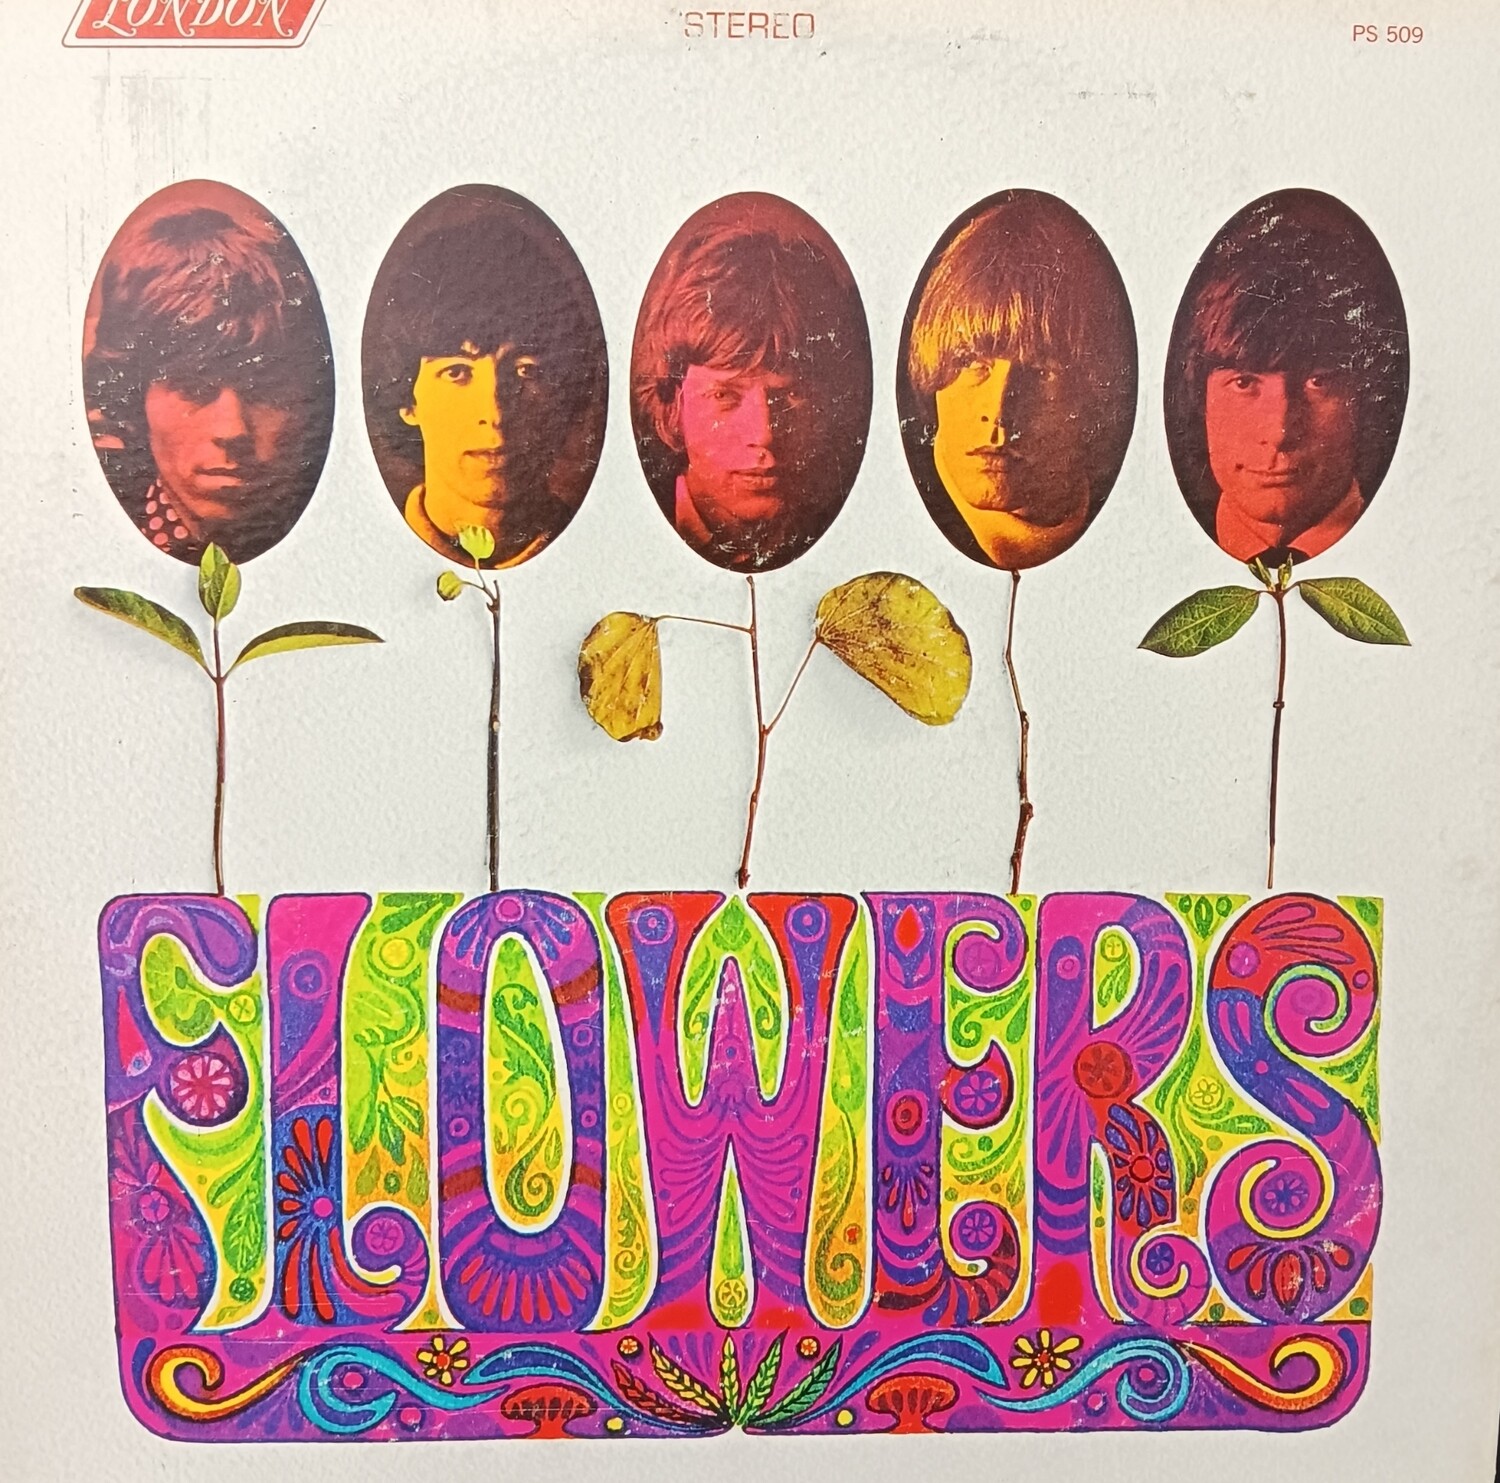 THE ROLLING STONES - Flowers